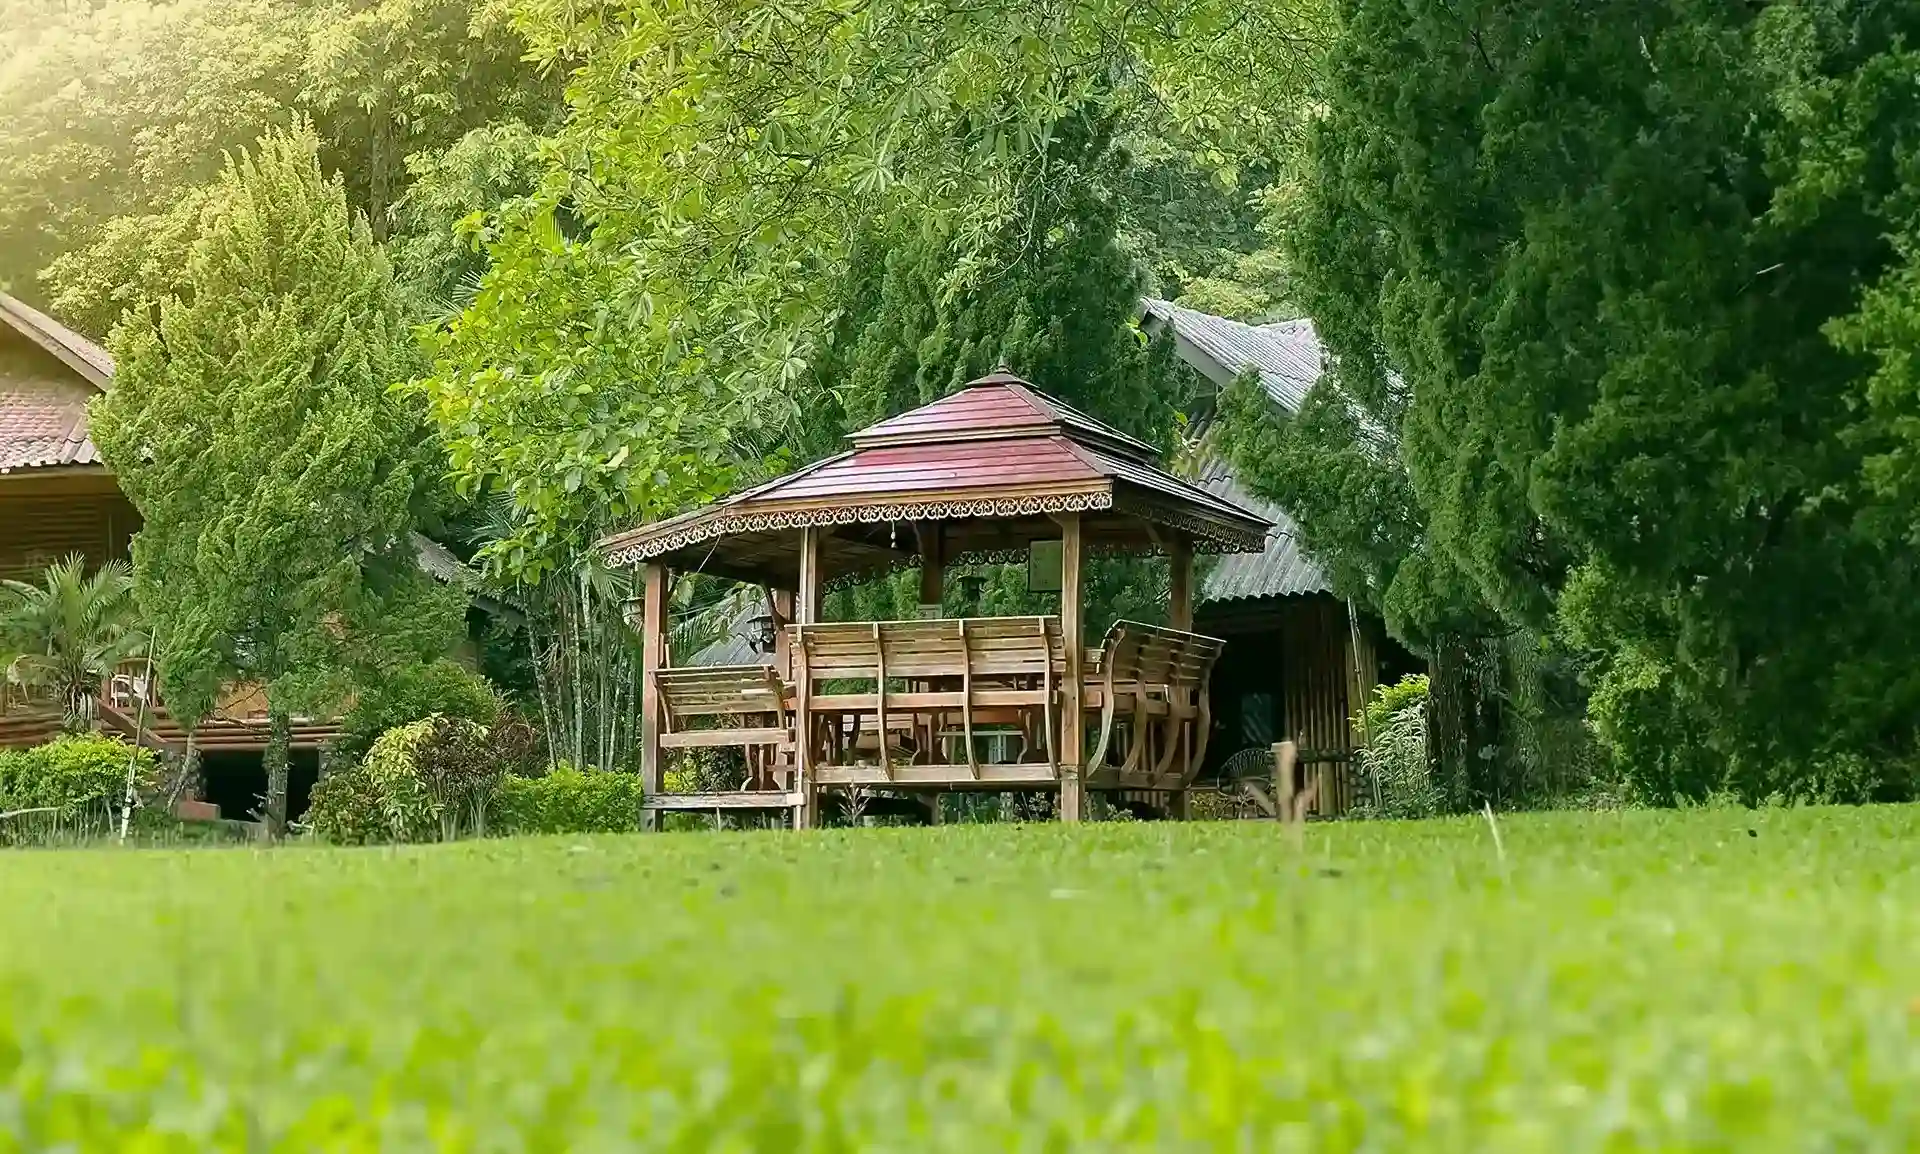 Open wooden pavilion in Siam Rehab garden with green lawn in foreground and sheer trees in background